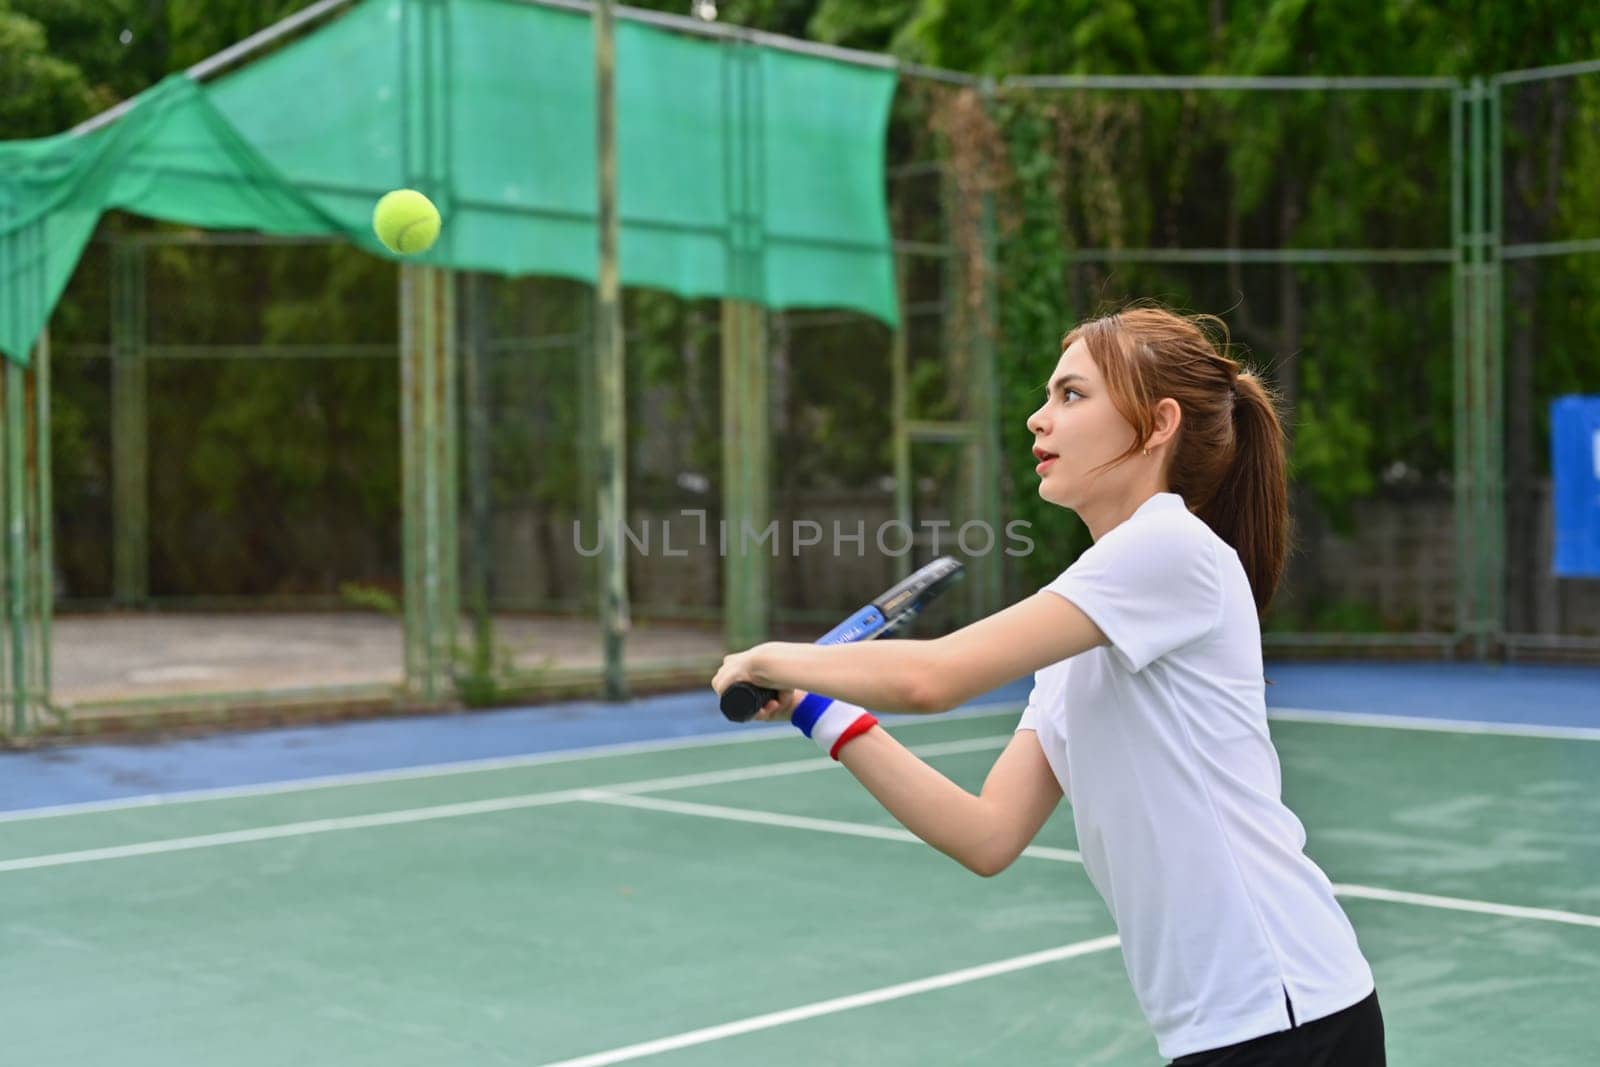 Athlete young woman hitting ball with racket during match. Fitness, sport, exercise concept.